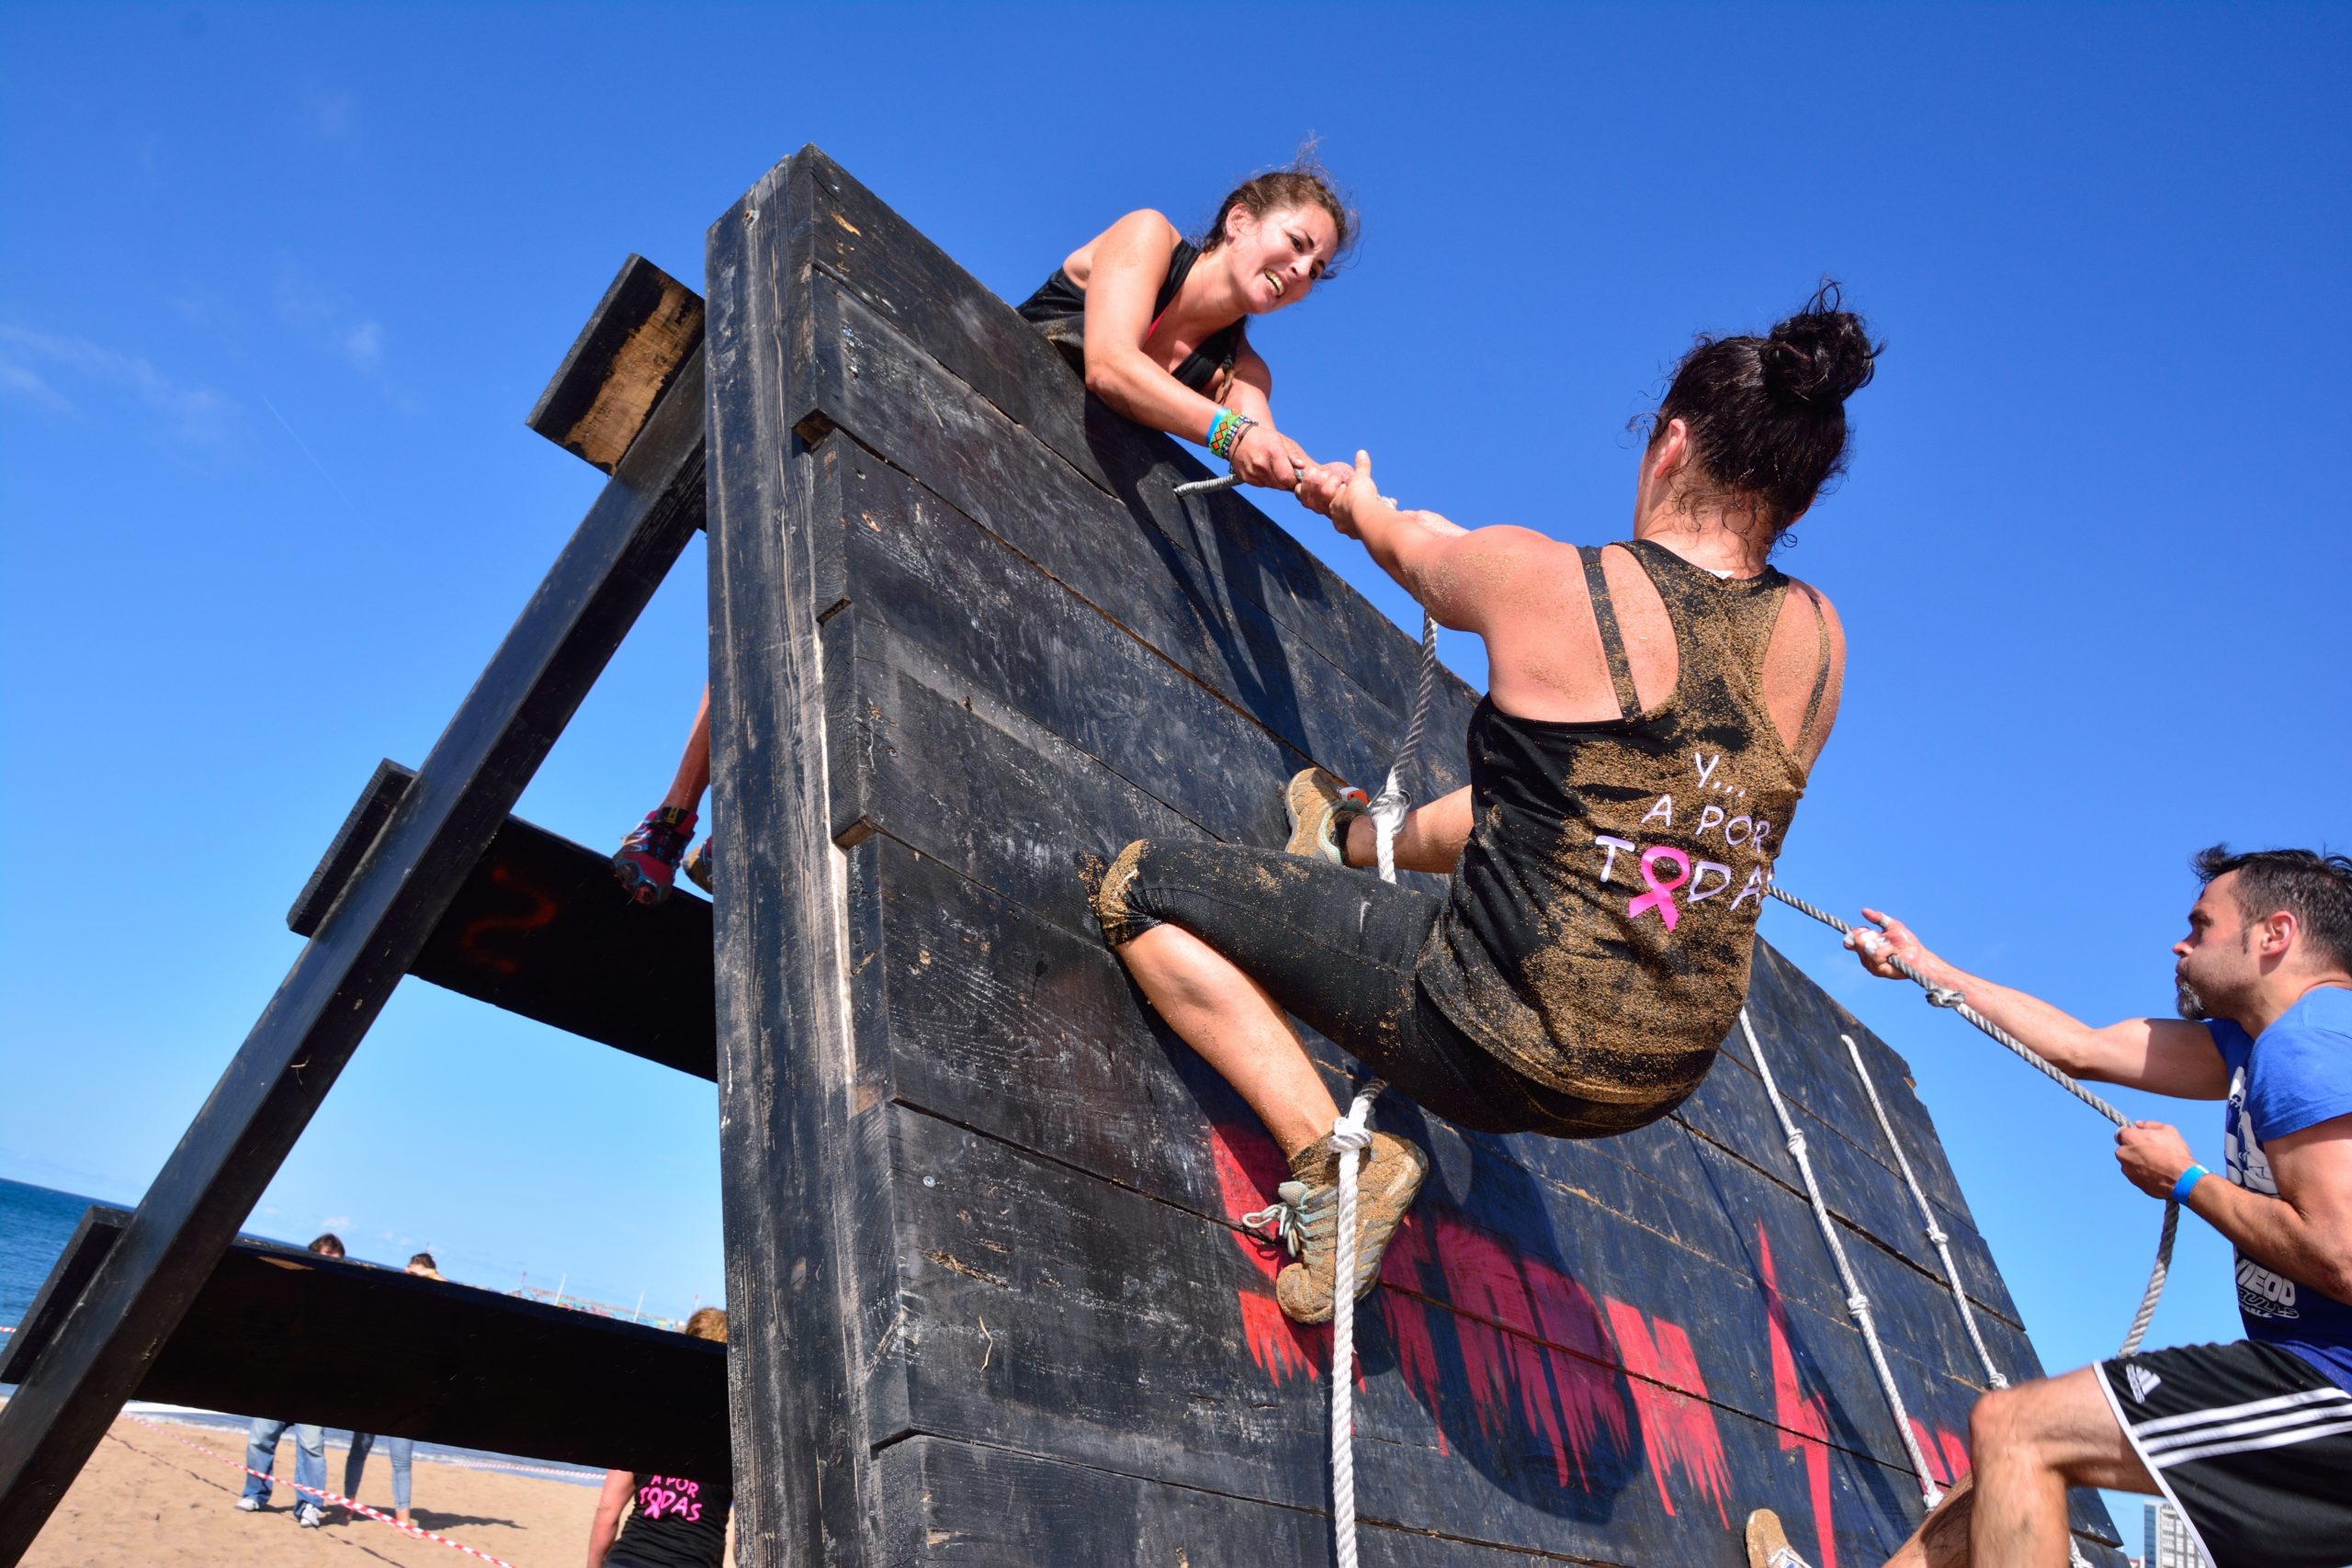 A woman climbing up a rope in a obstacle course with another woman offering to help